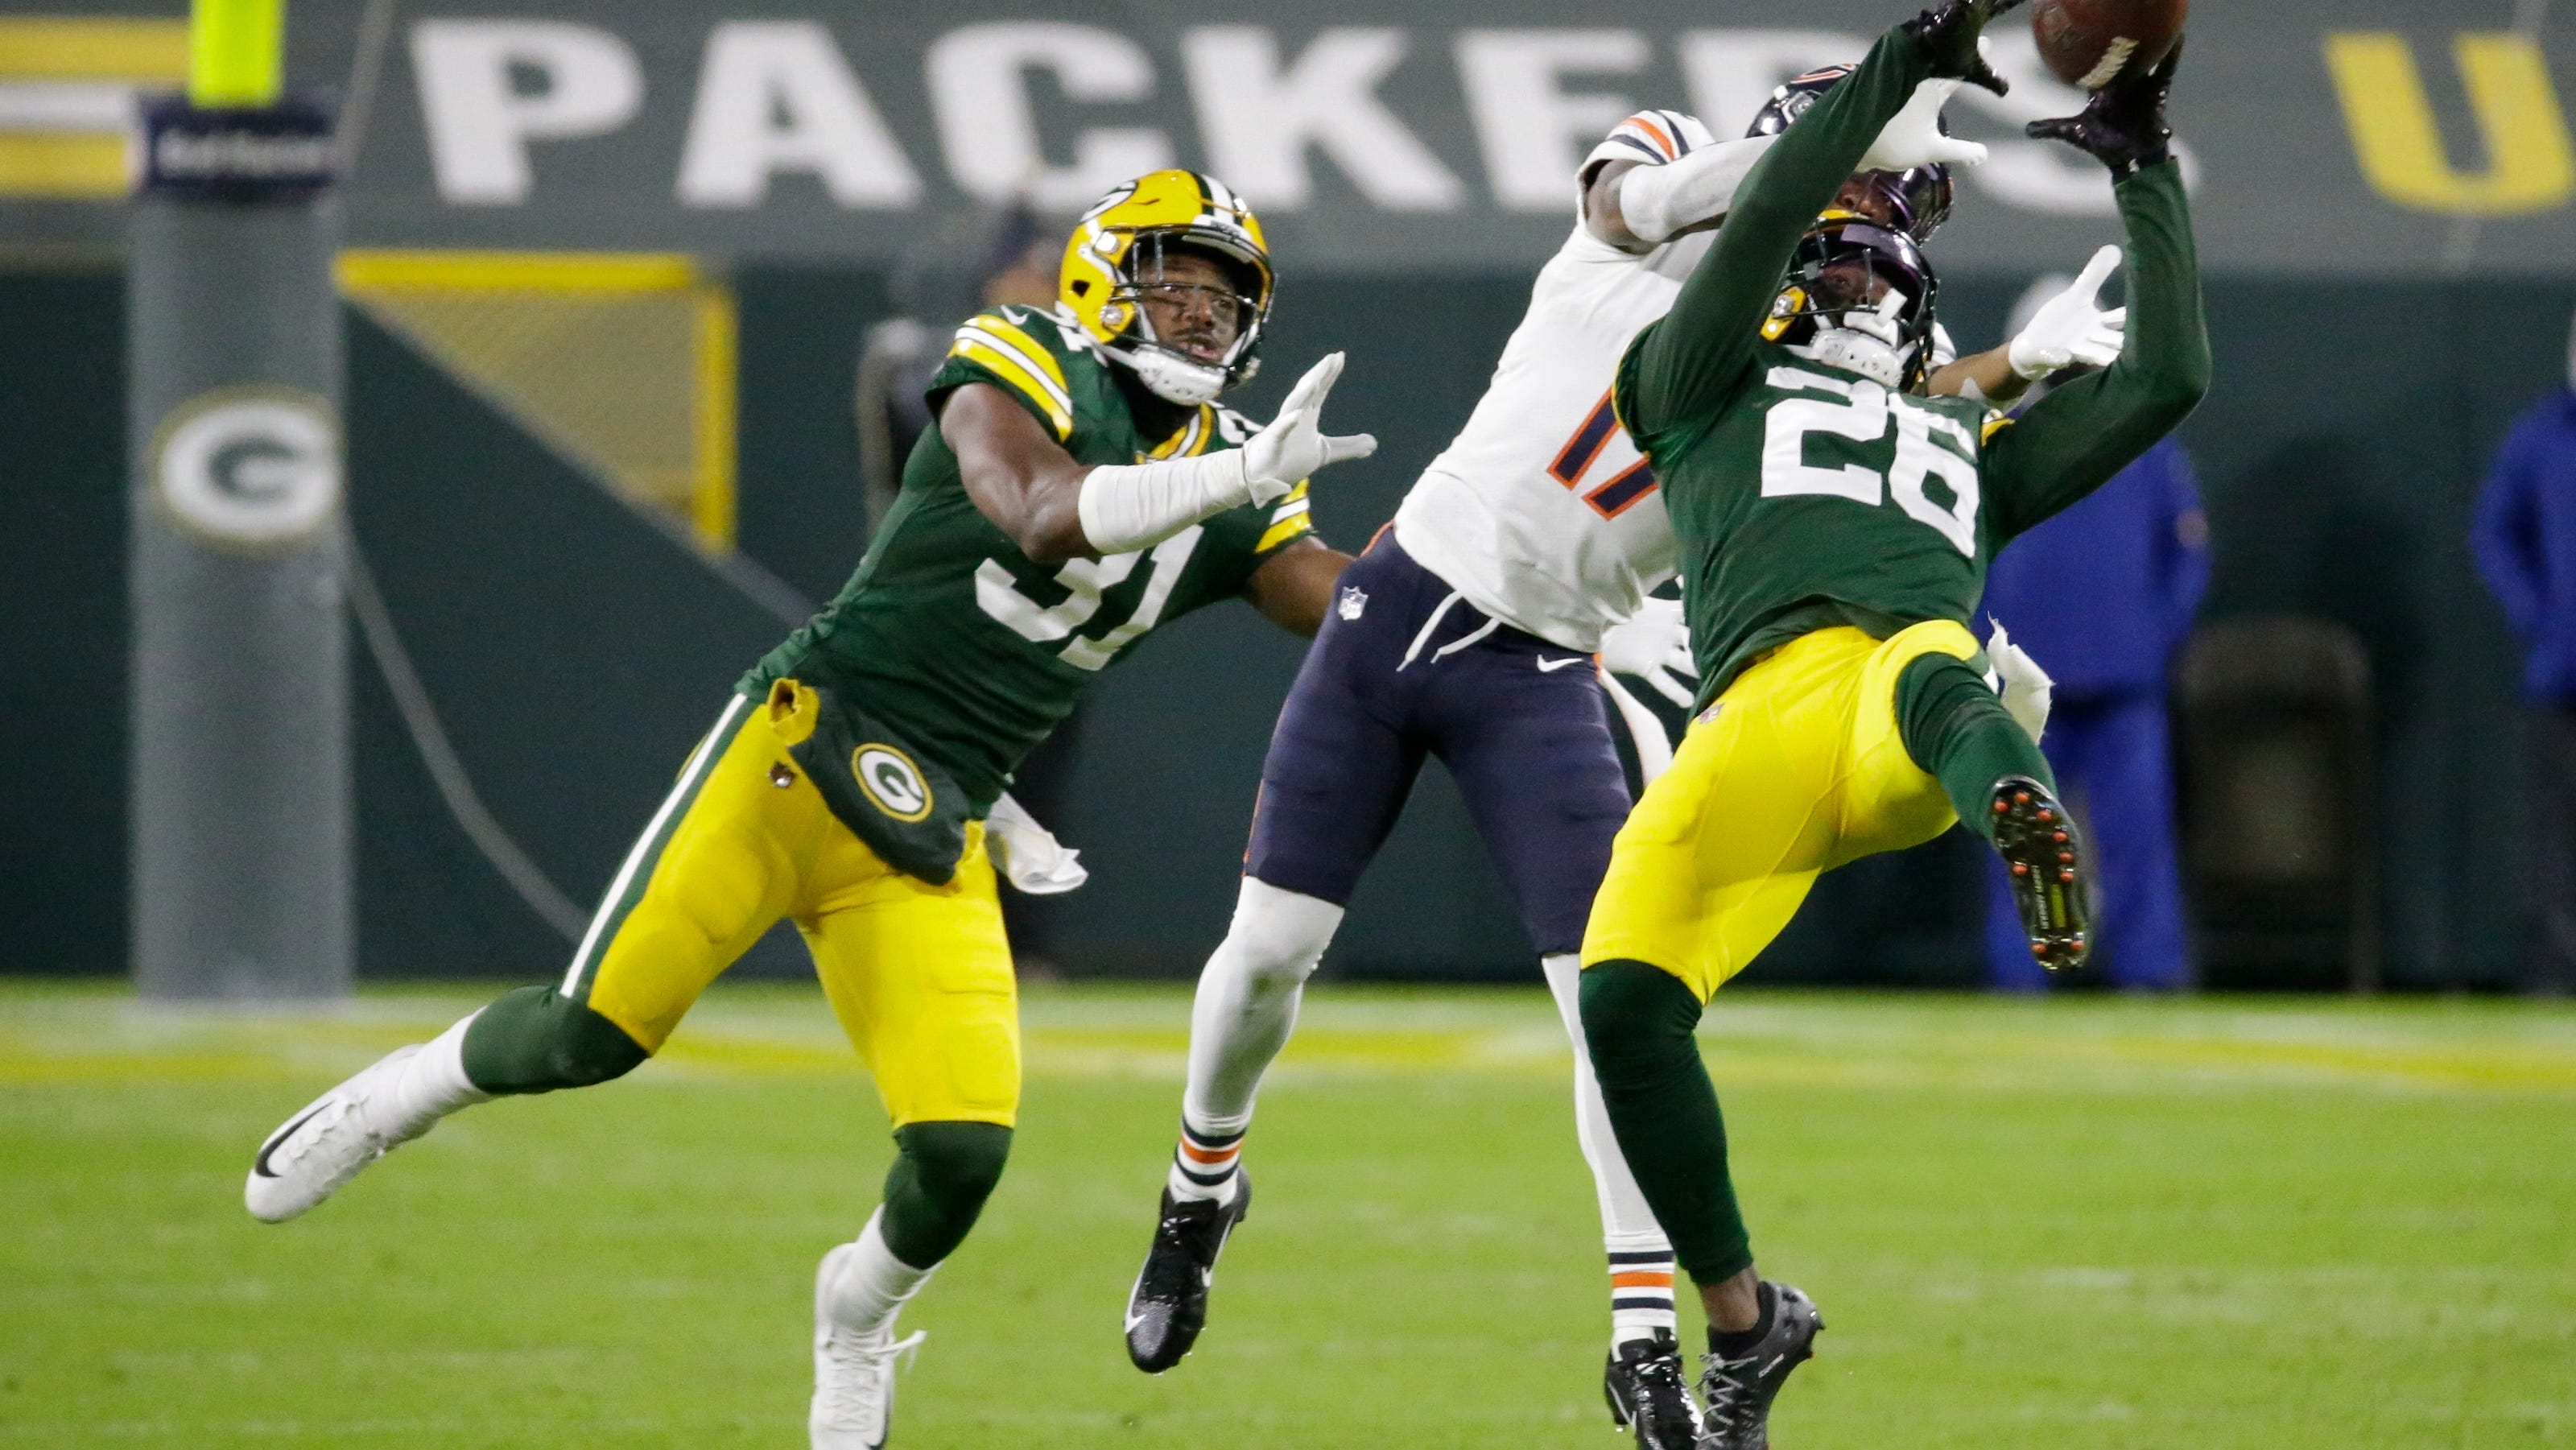 Packers' safety one of several Delaware stars shining in NFL's prime